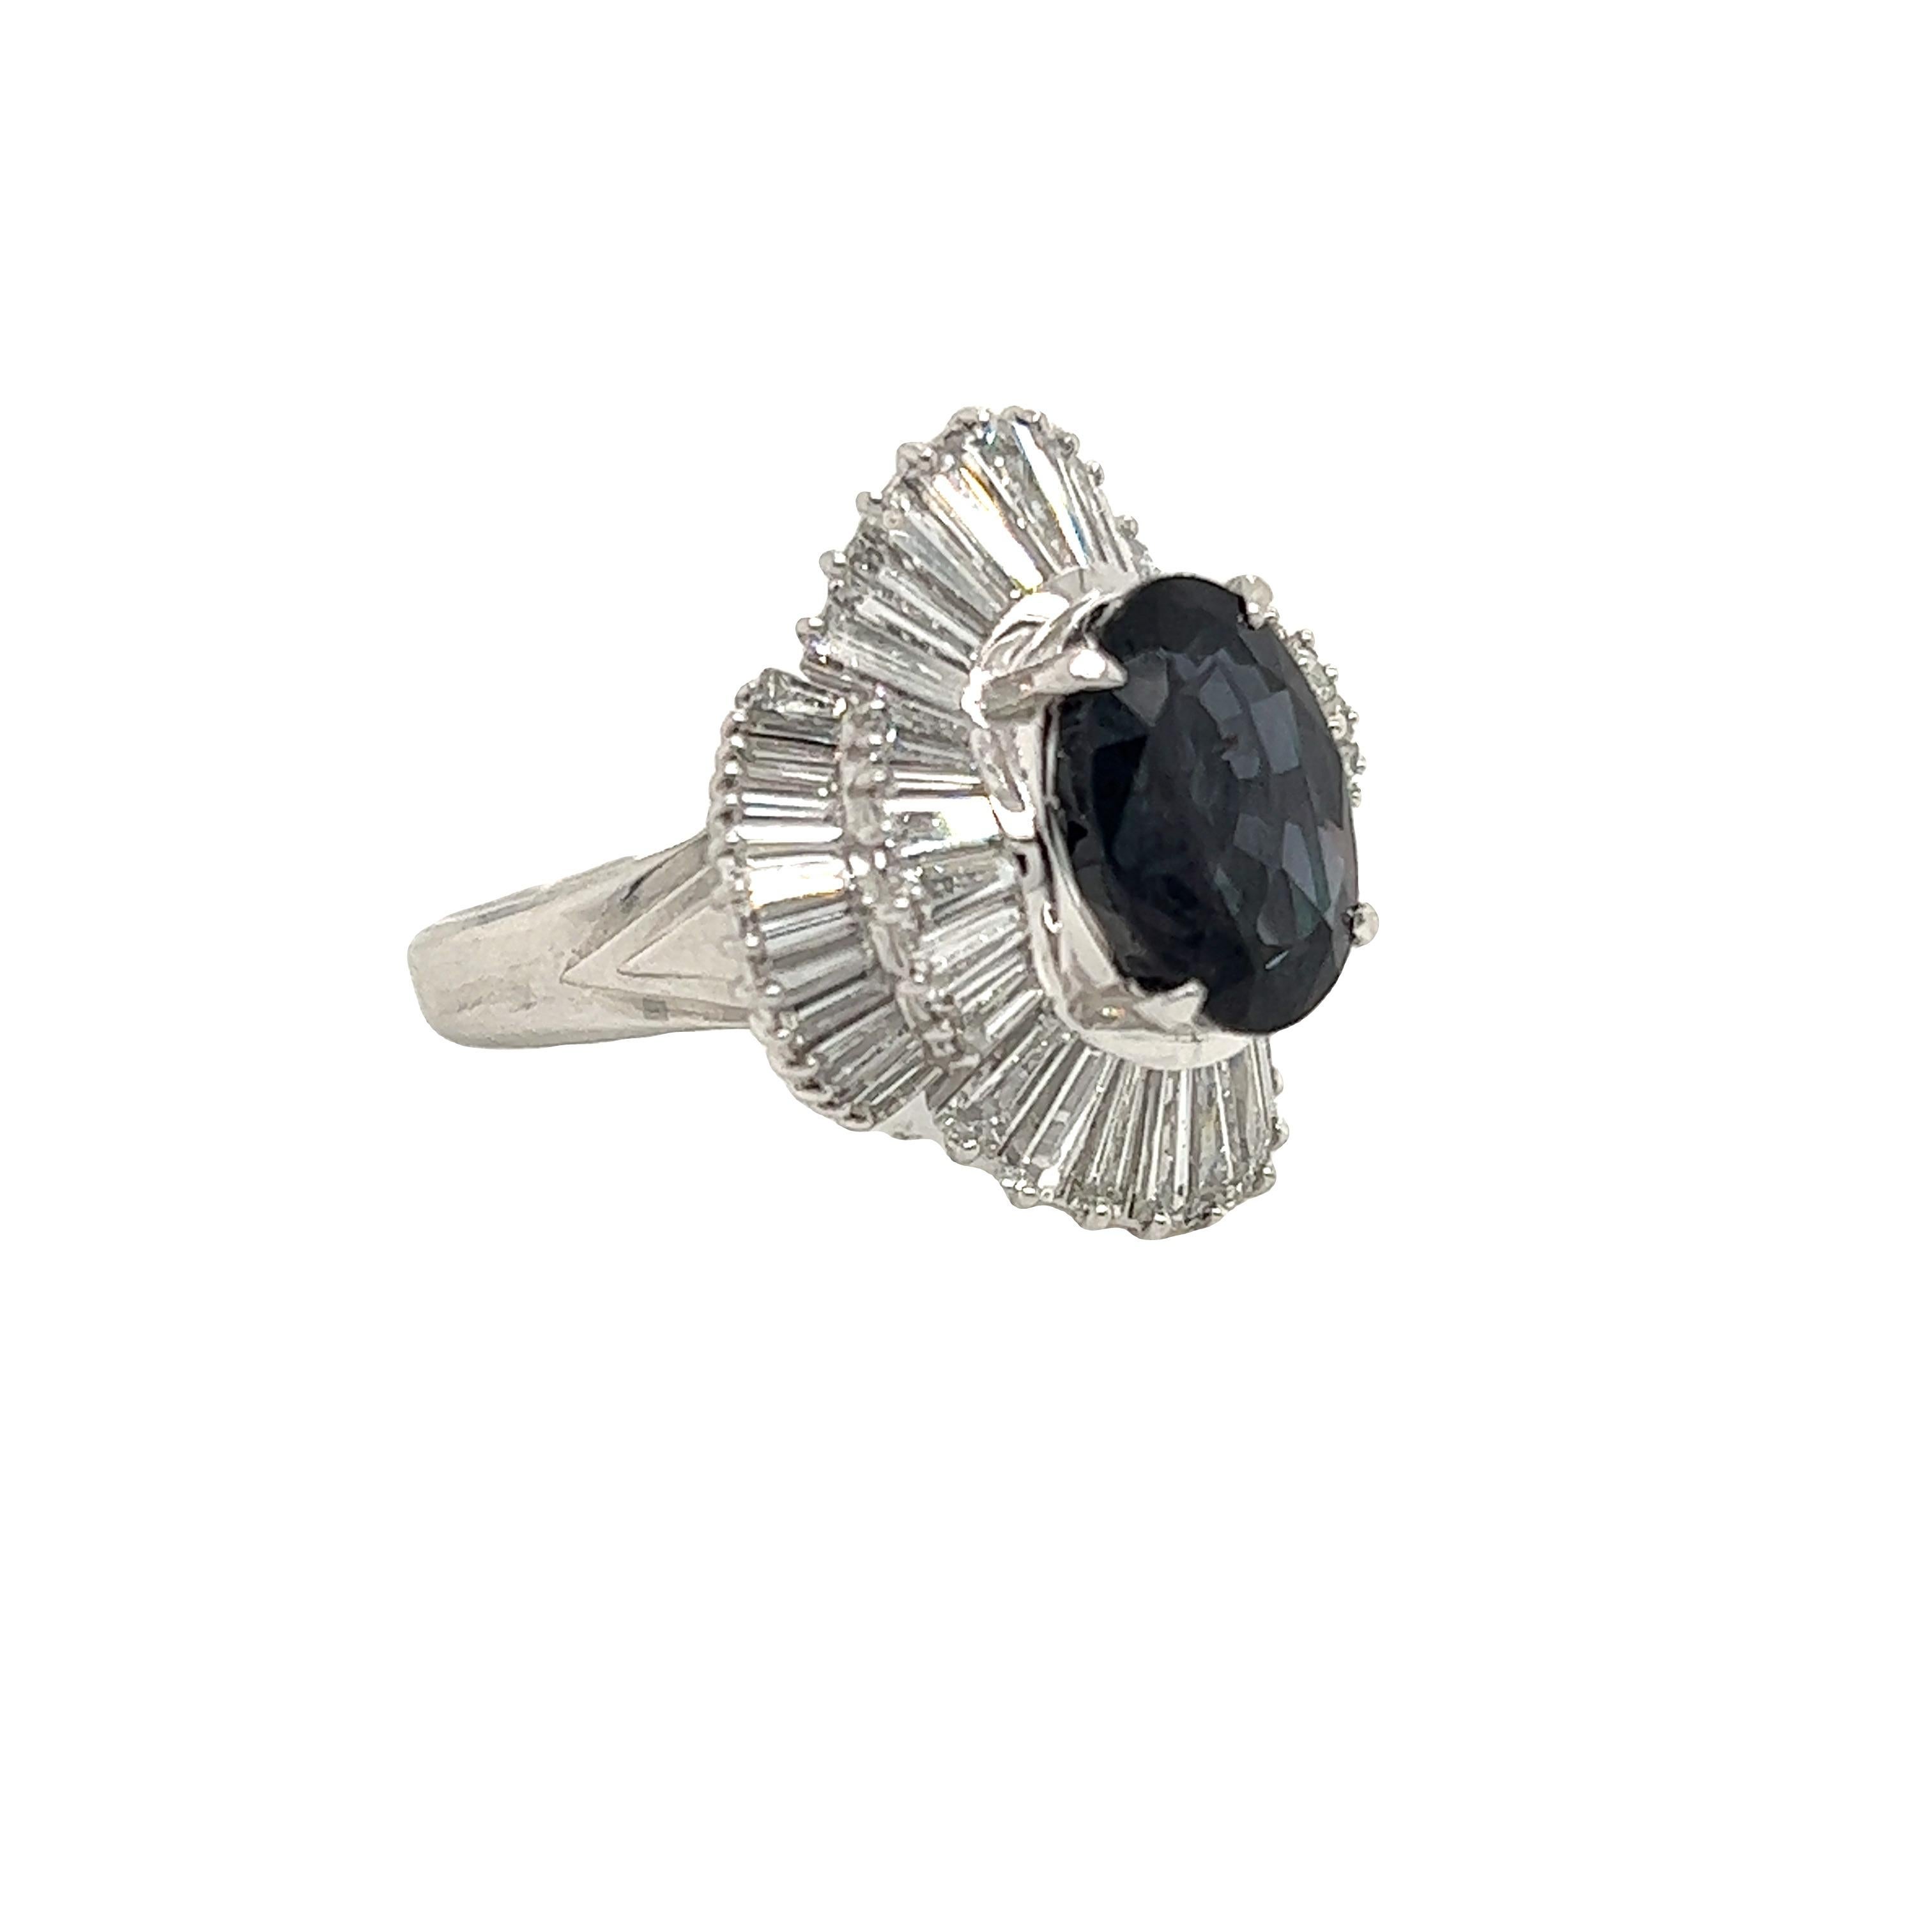 This is a gorgeous natural AAA quality oval Alexandrite surrounded by dainty diamonds that is set in a vintage platinum setting. This ring features a natural 4.34 carat oval alexandrite that is certified by the Gemological Institute of America (GIA)